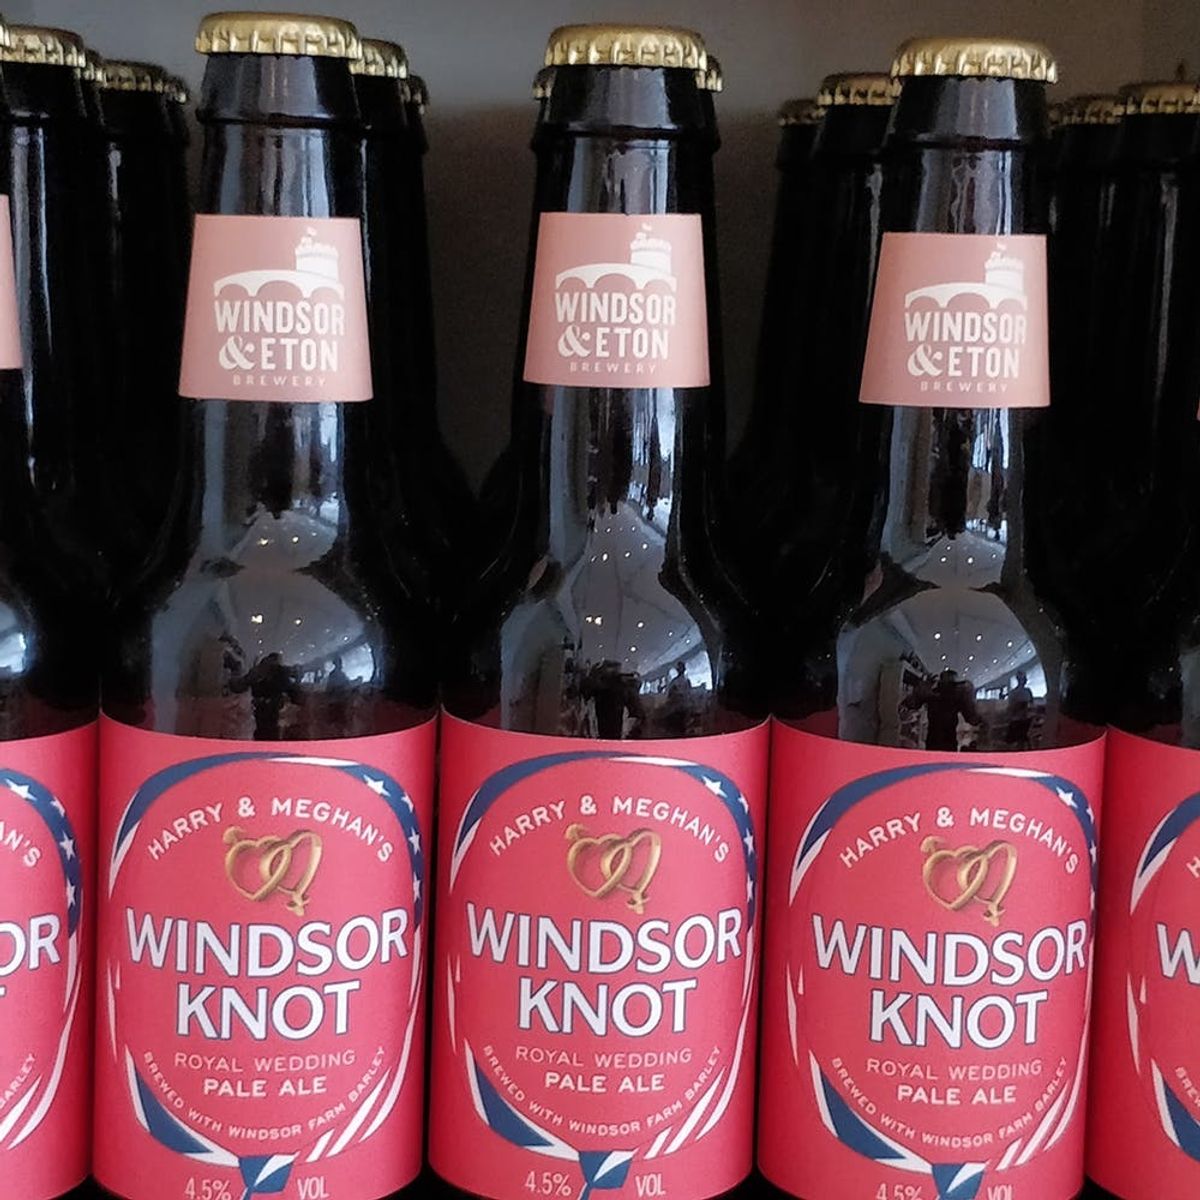 Clink to Prince Harry and Meghan Markle’s Upcoming Wedding With This “Windsor Knot” Beer